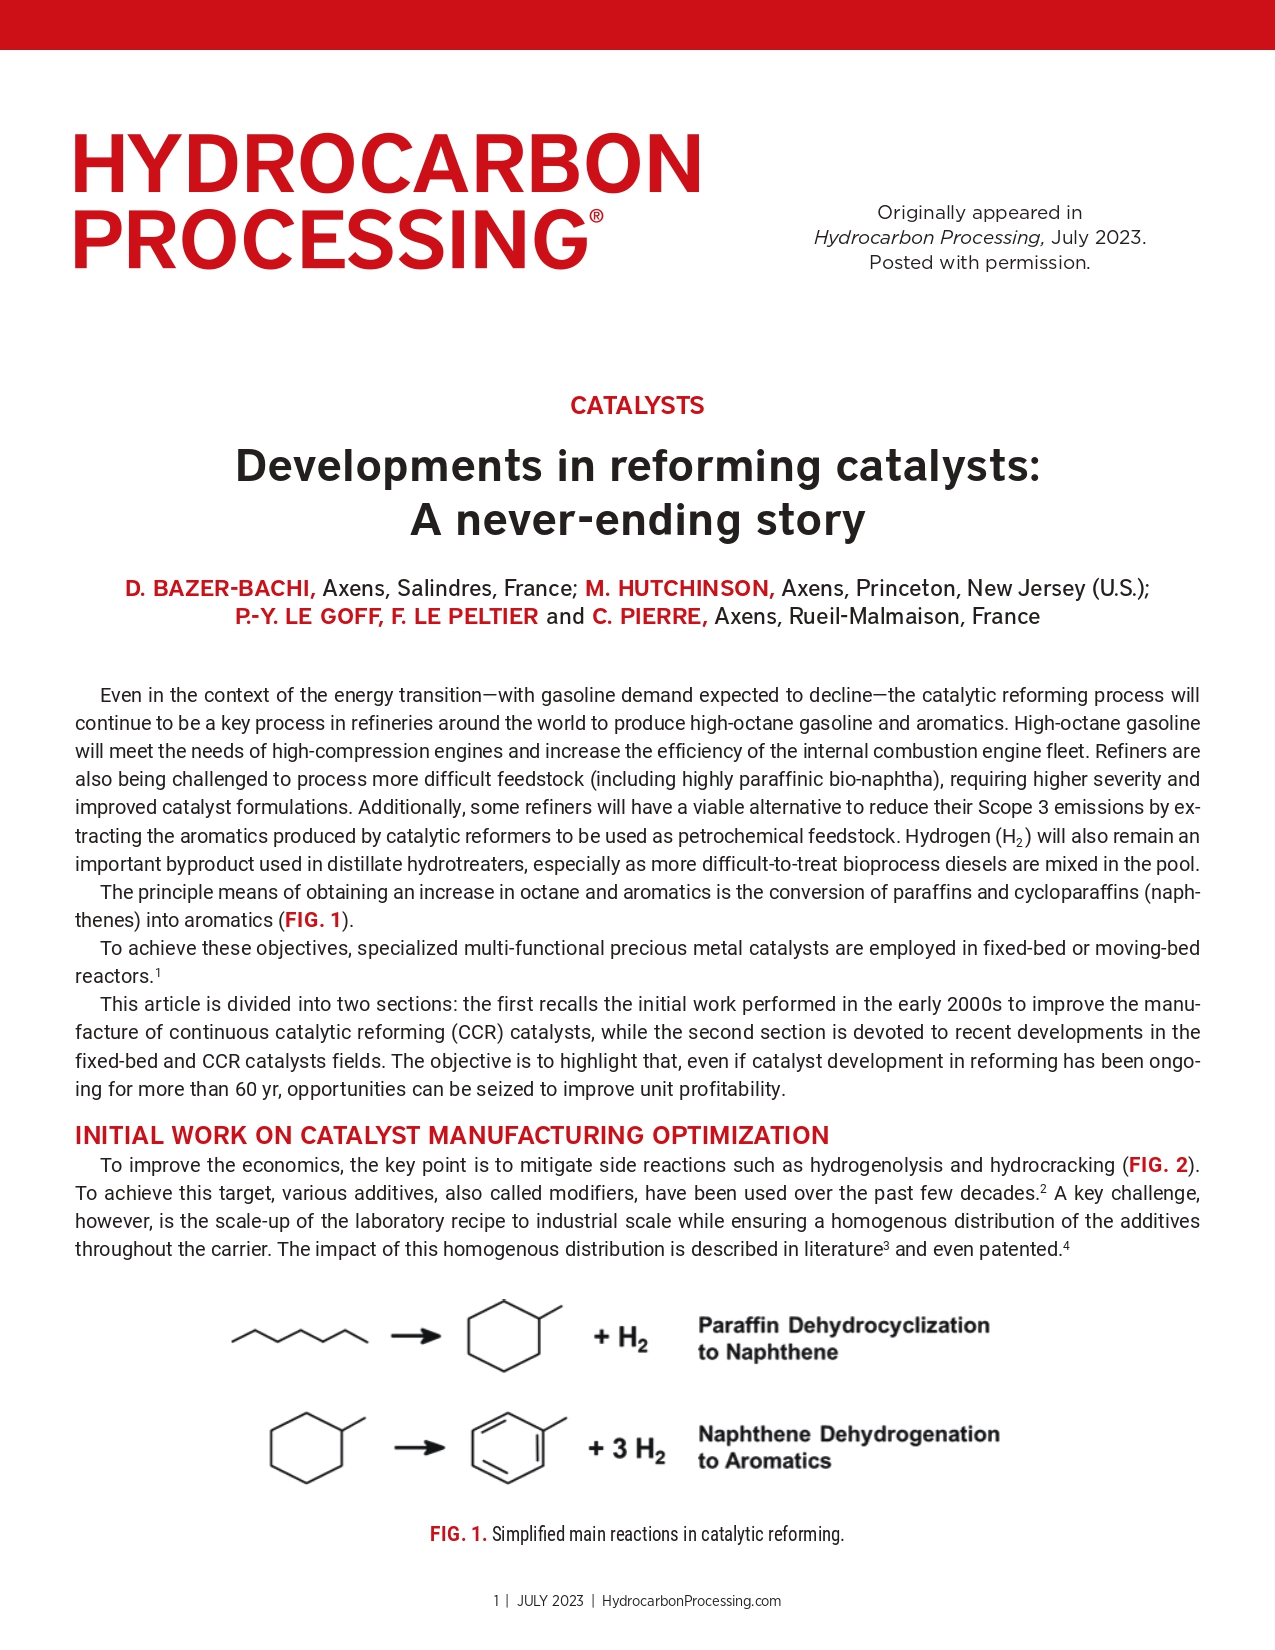 Thumb_Axens_TA_Development in reforming catalysts a never ending story_EN_2023